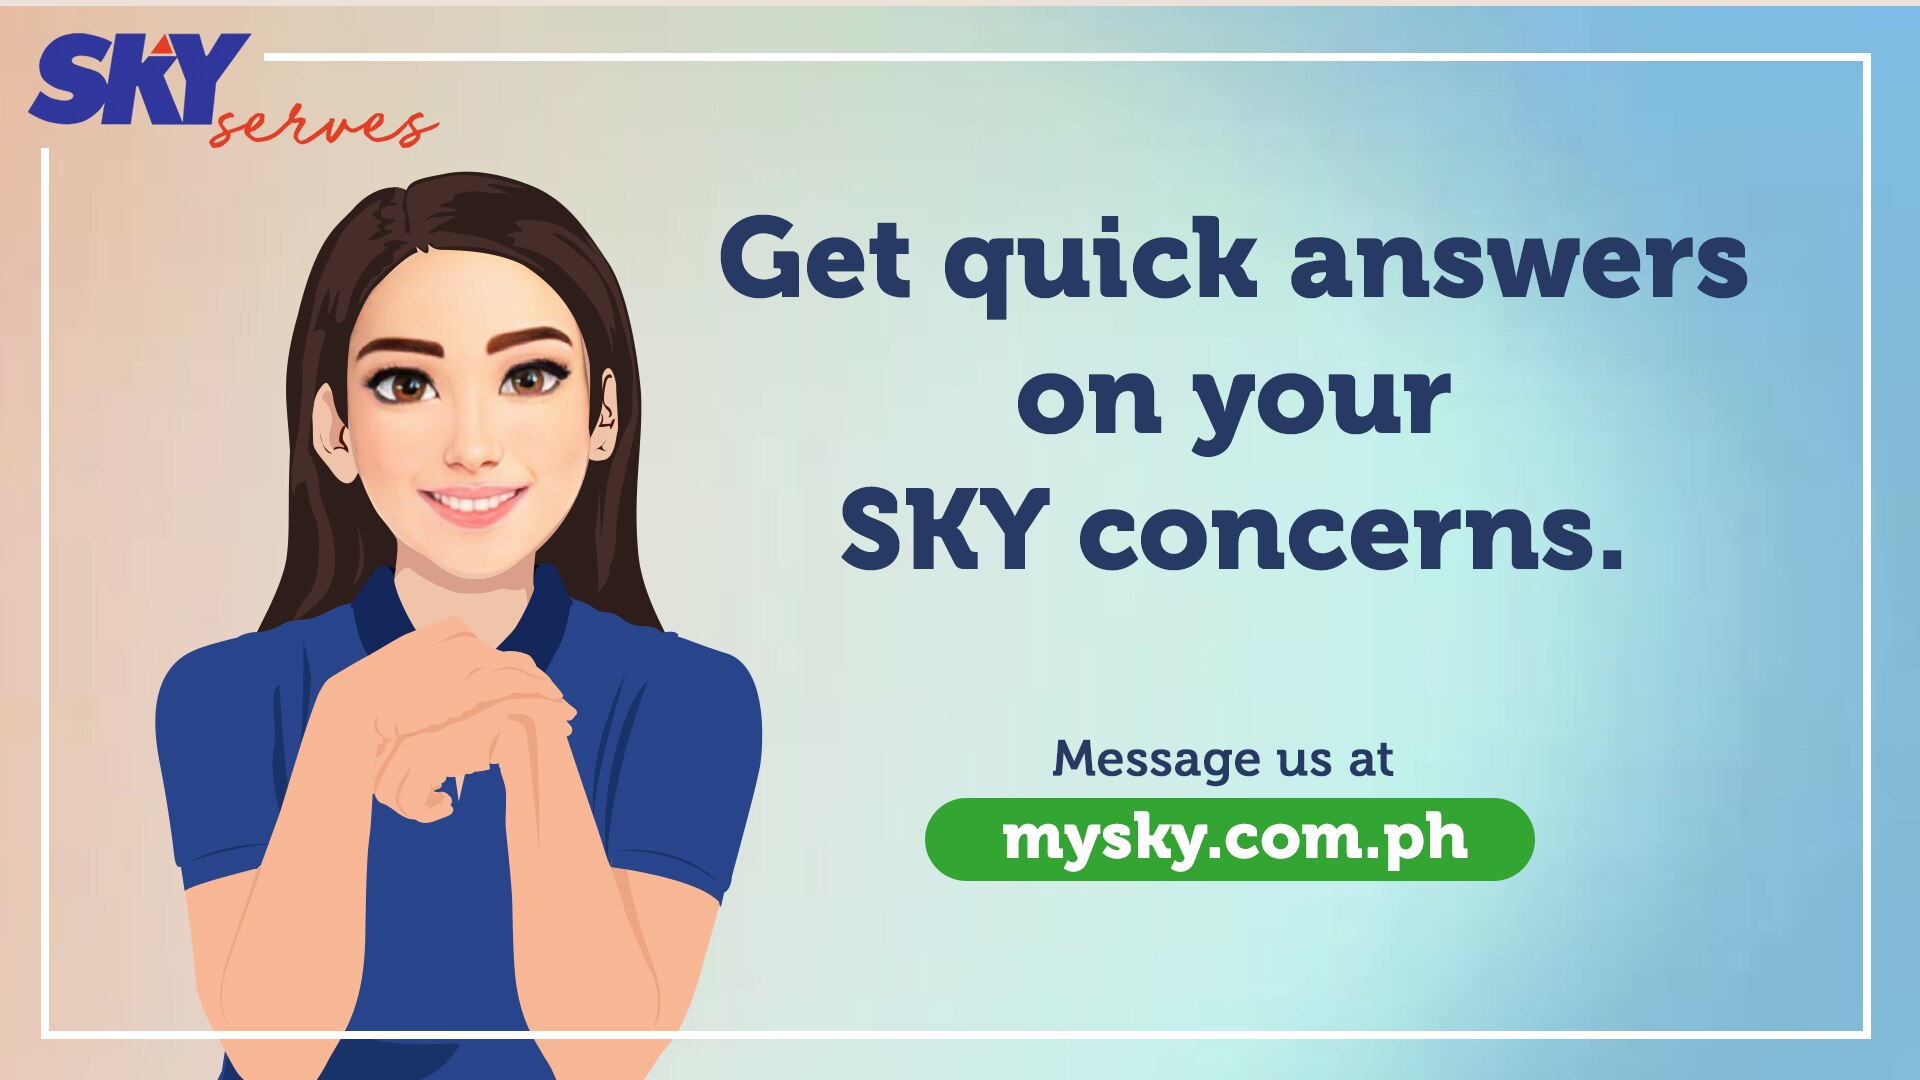 SKY launches new 24/7 customer service messaging platform